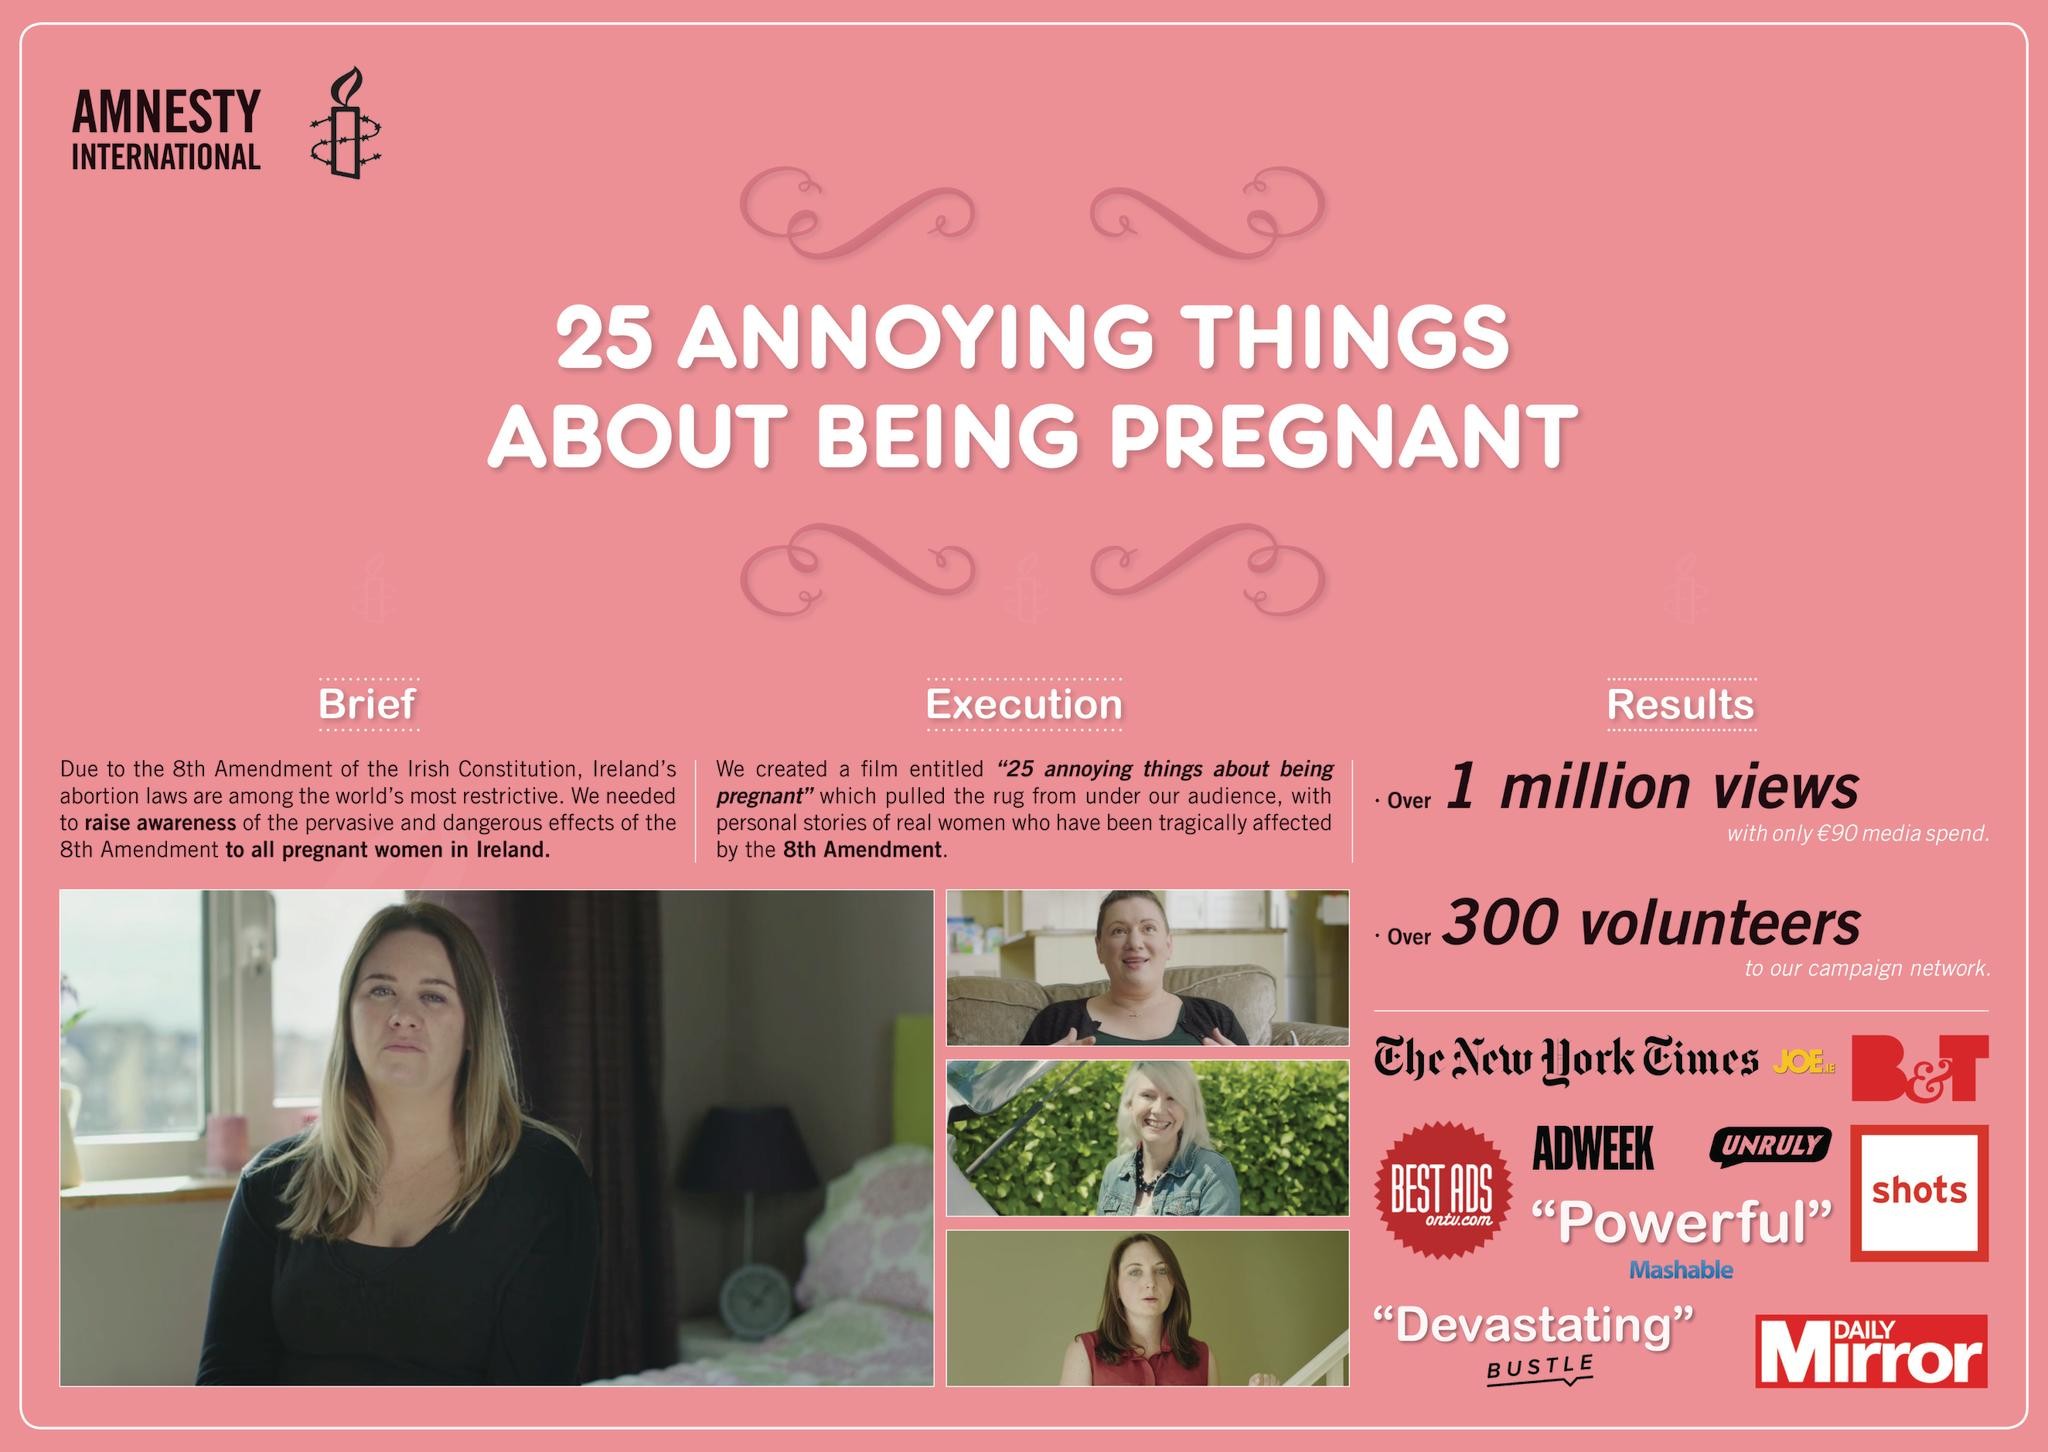 25 Annoying Things About Being Pregnant